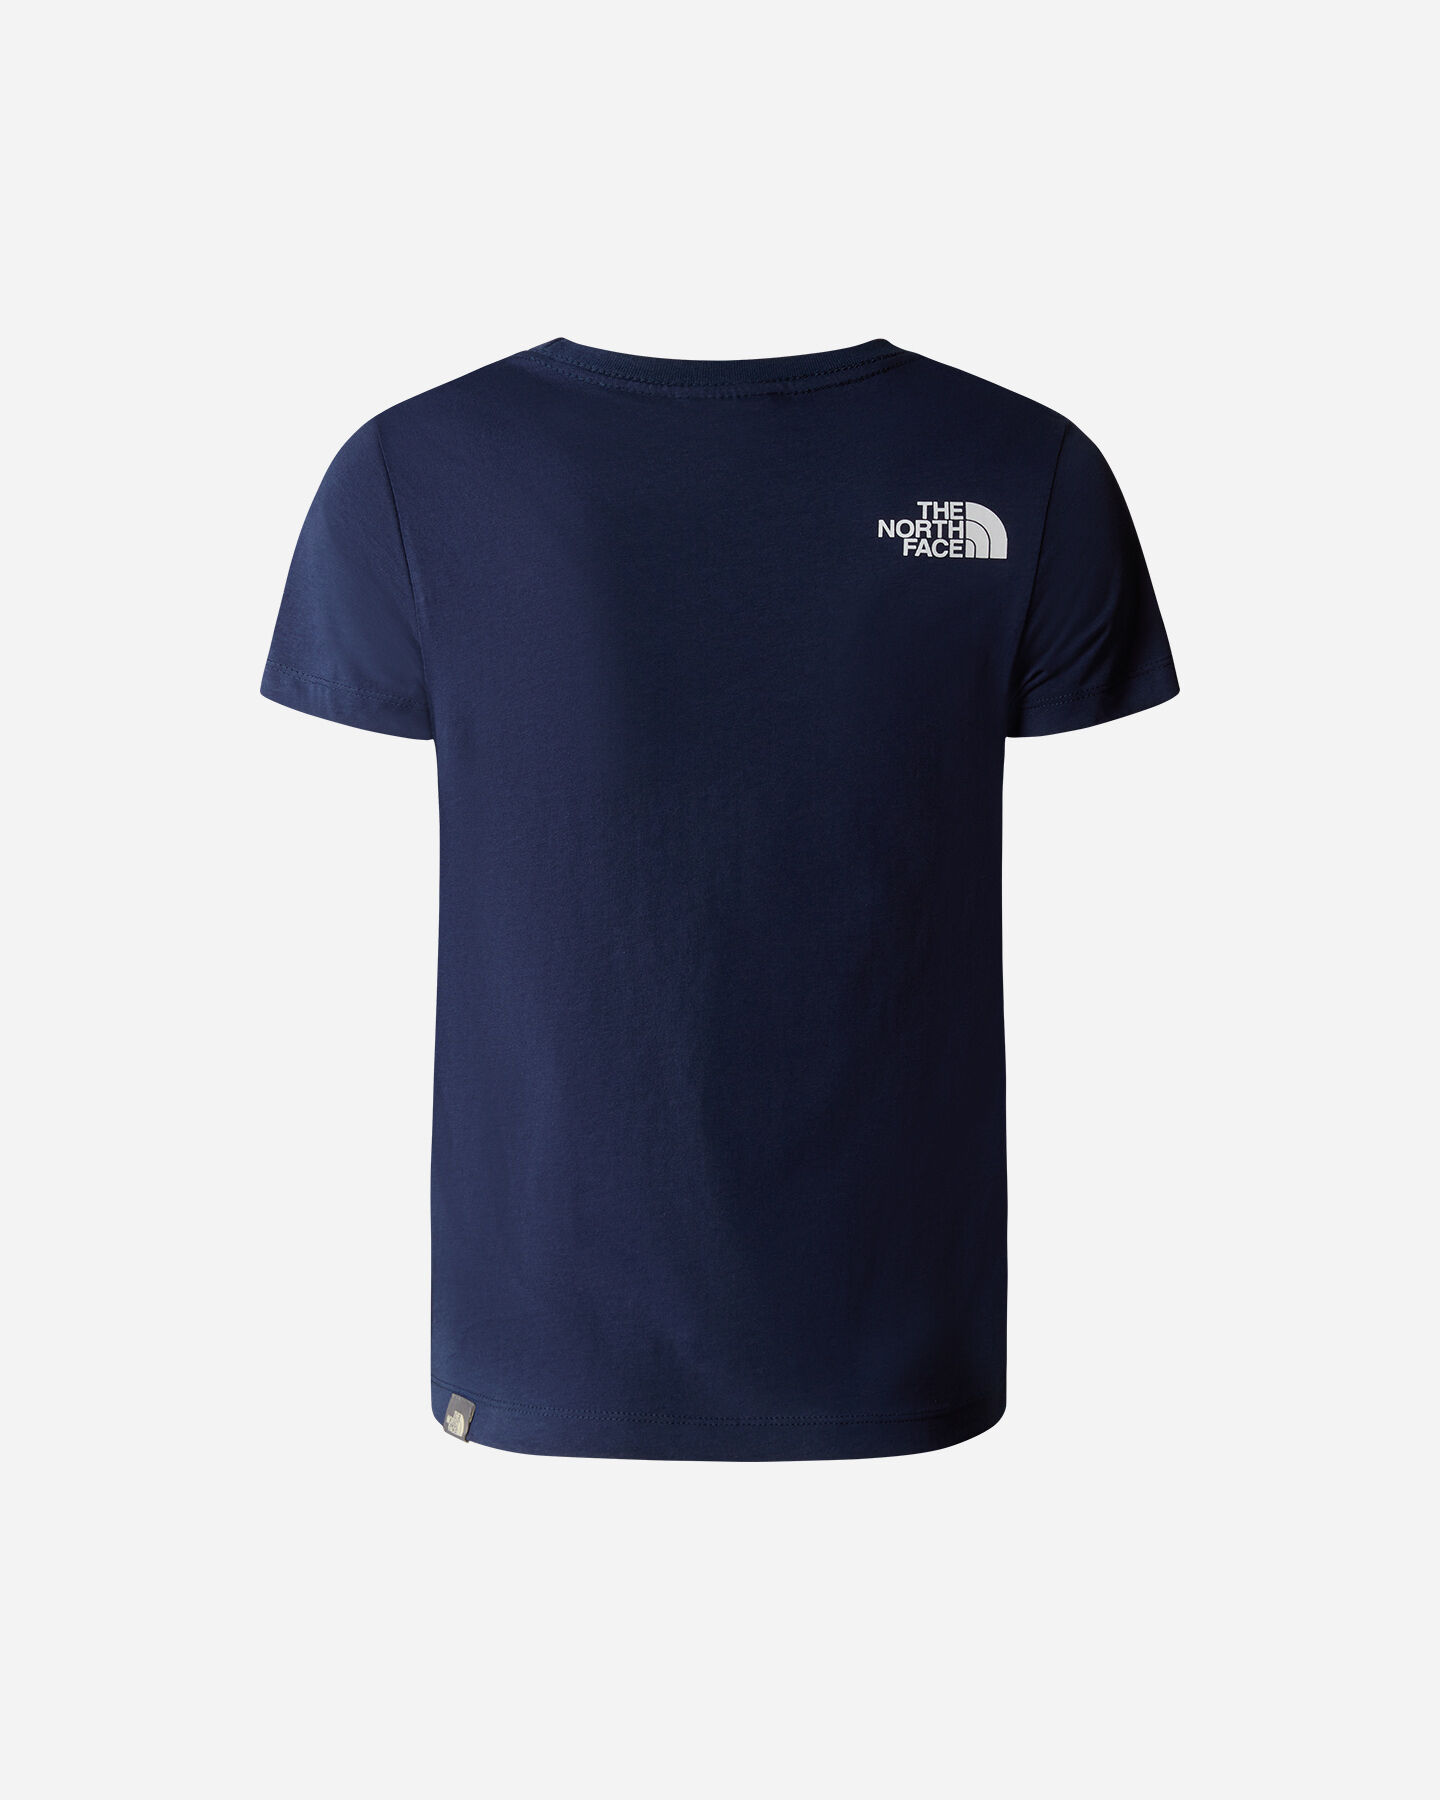  T-Shirt THE NORTH FACE EASY JR S5537407 scatto 1